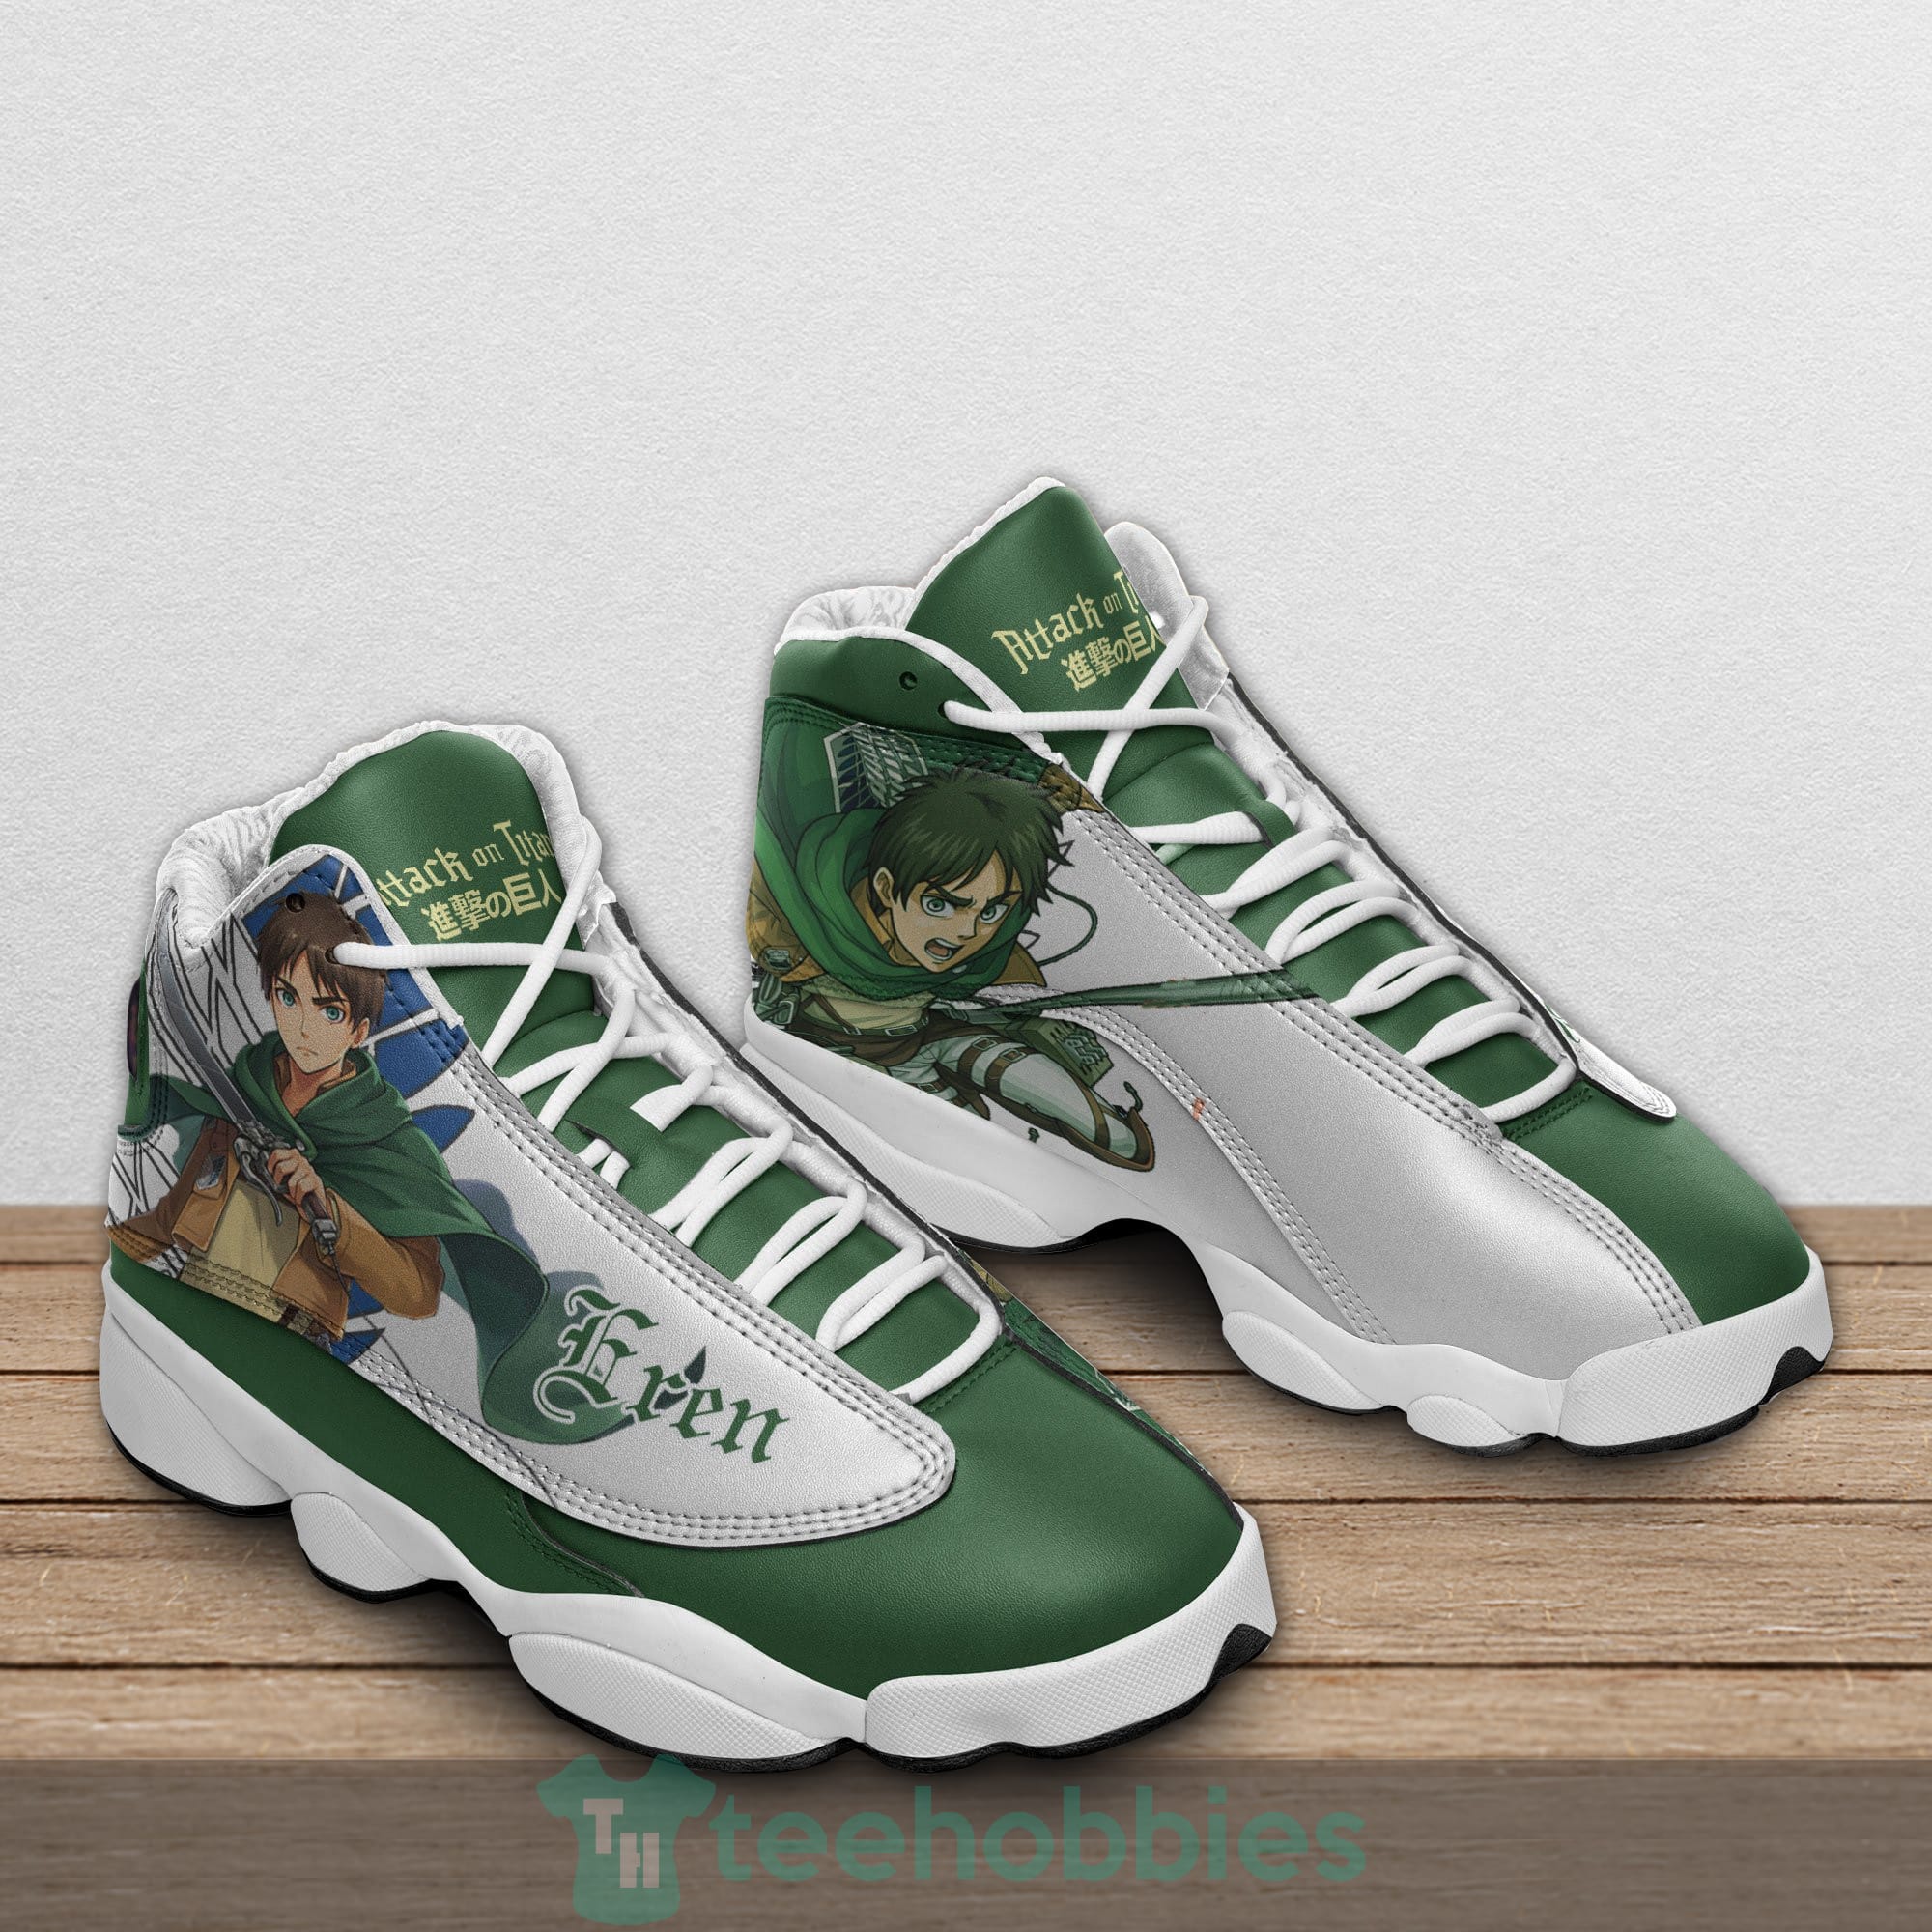 Eren Yeager Custom Attack On Titan Anime Air Jordan 13 Shoes Product photo 2